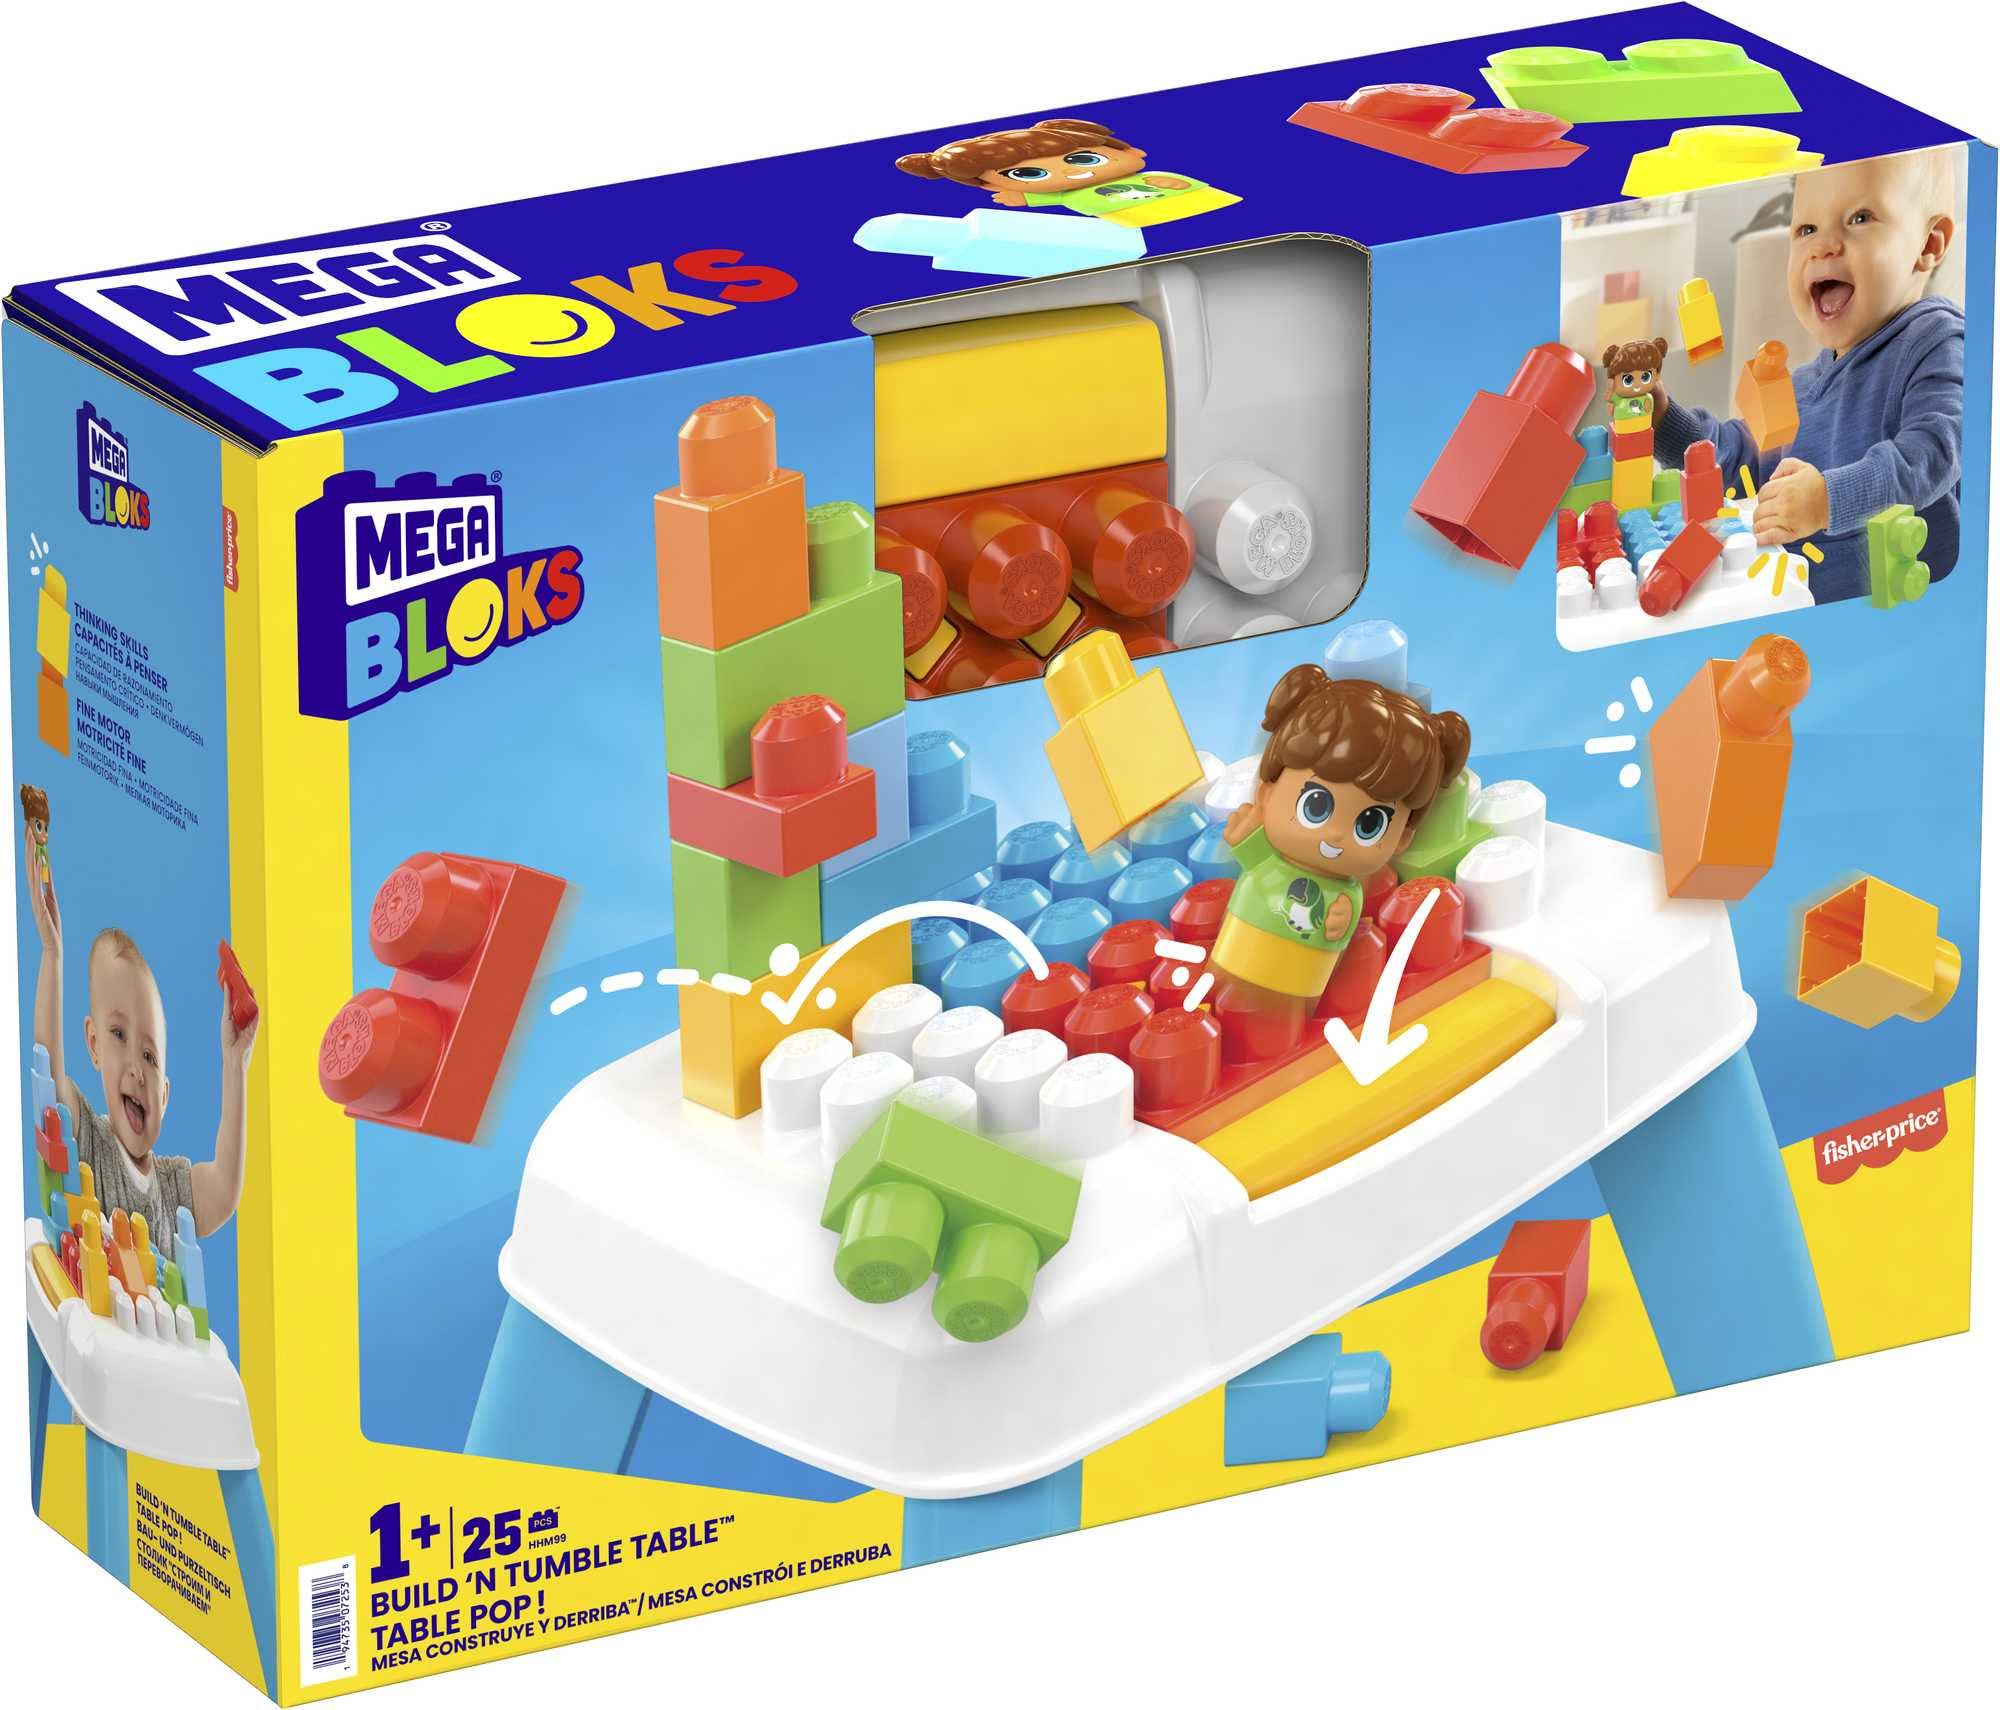 MEGA BLOKS Fisher Price Toddler Building Blocks, Build N Tumble Activity Table With 25 Pieces and Storage, 1 Figure, Toy Gift Ideas For Kids